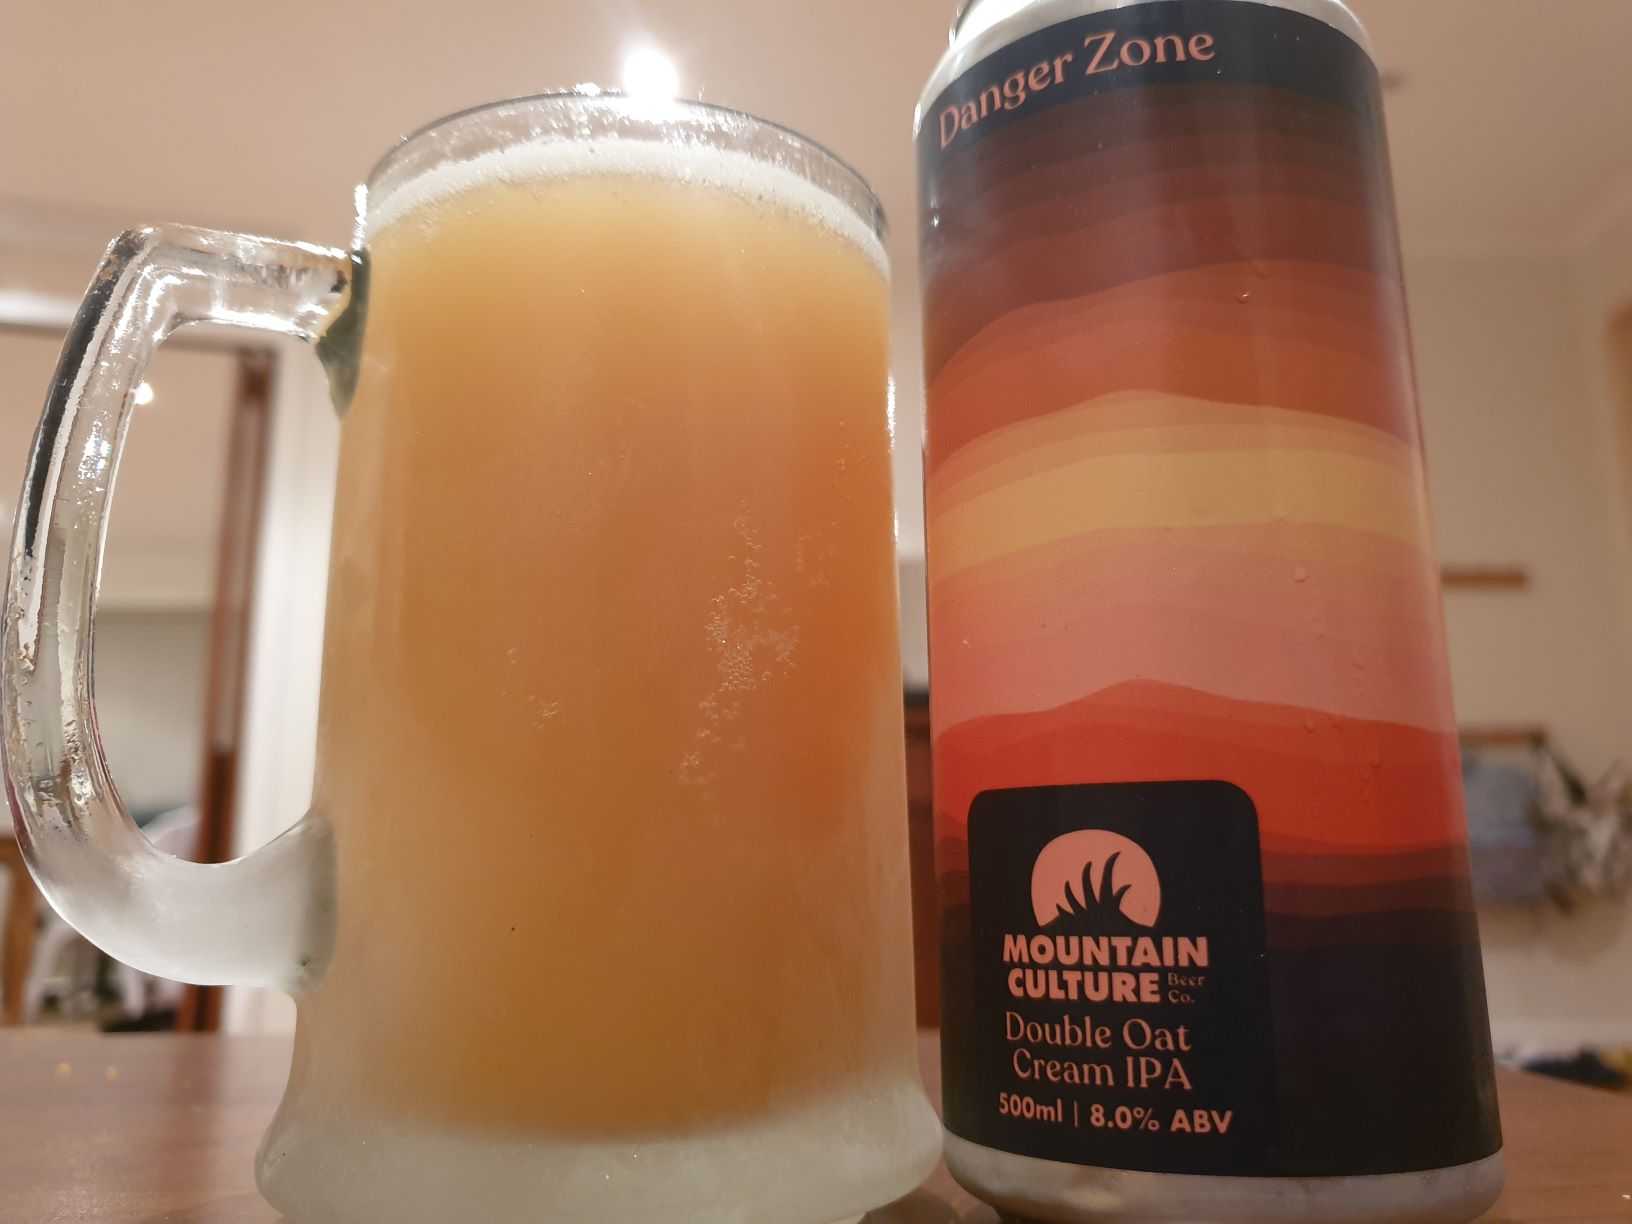 Danger Zone Double Oat Cream IPA by Mountain Culture Beer Co